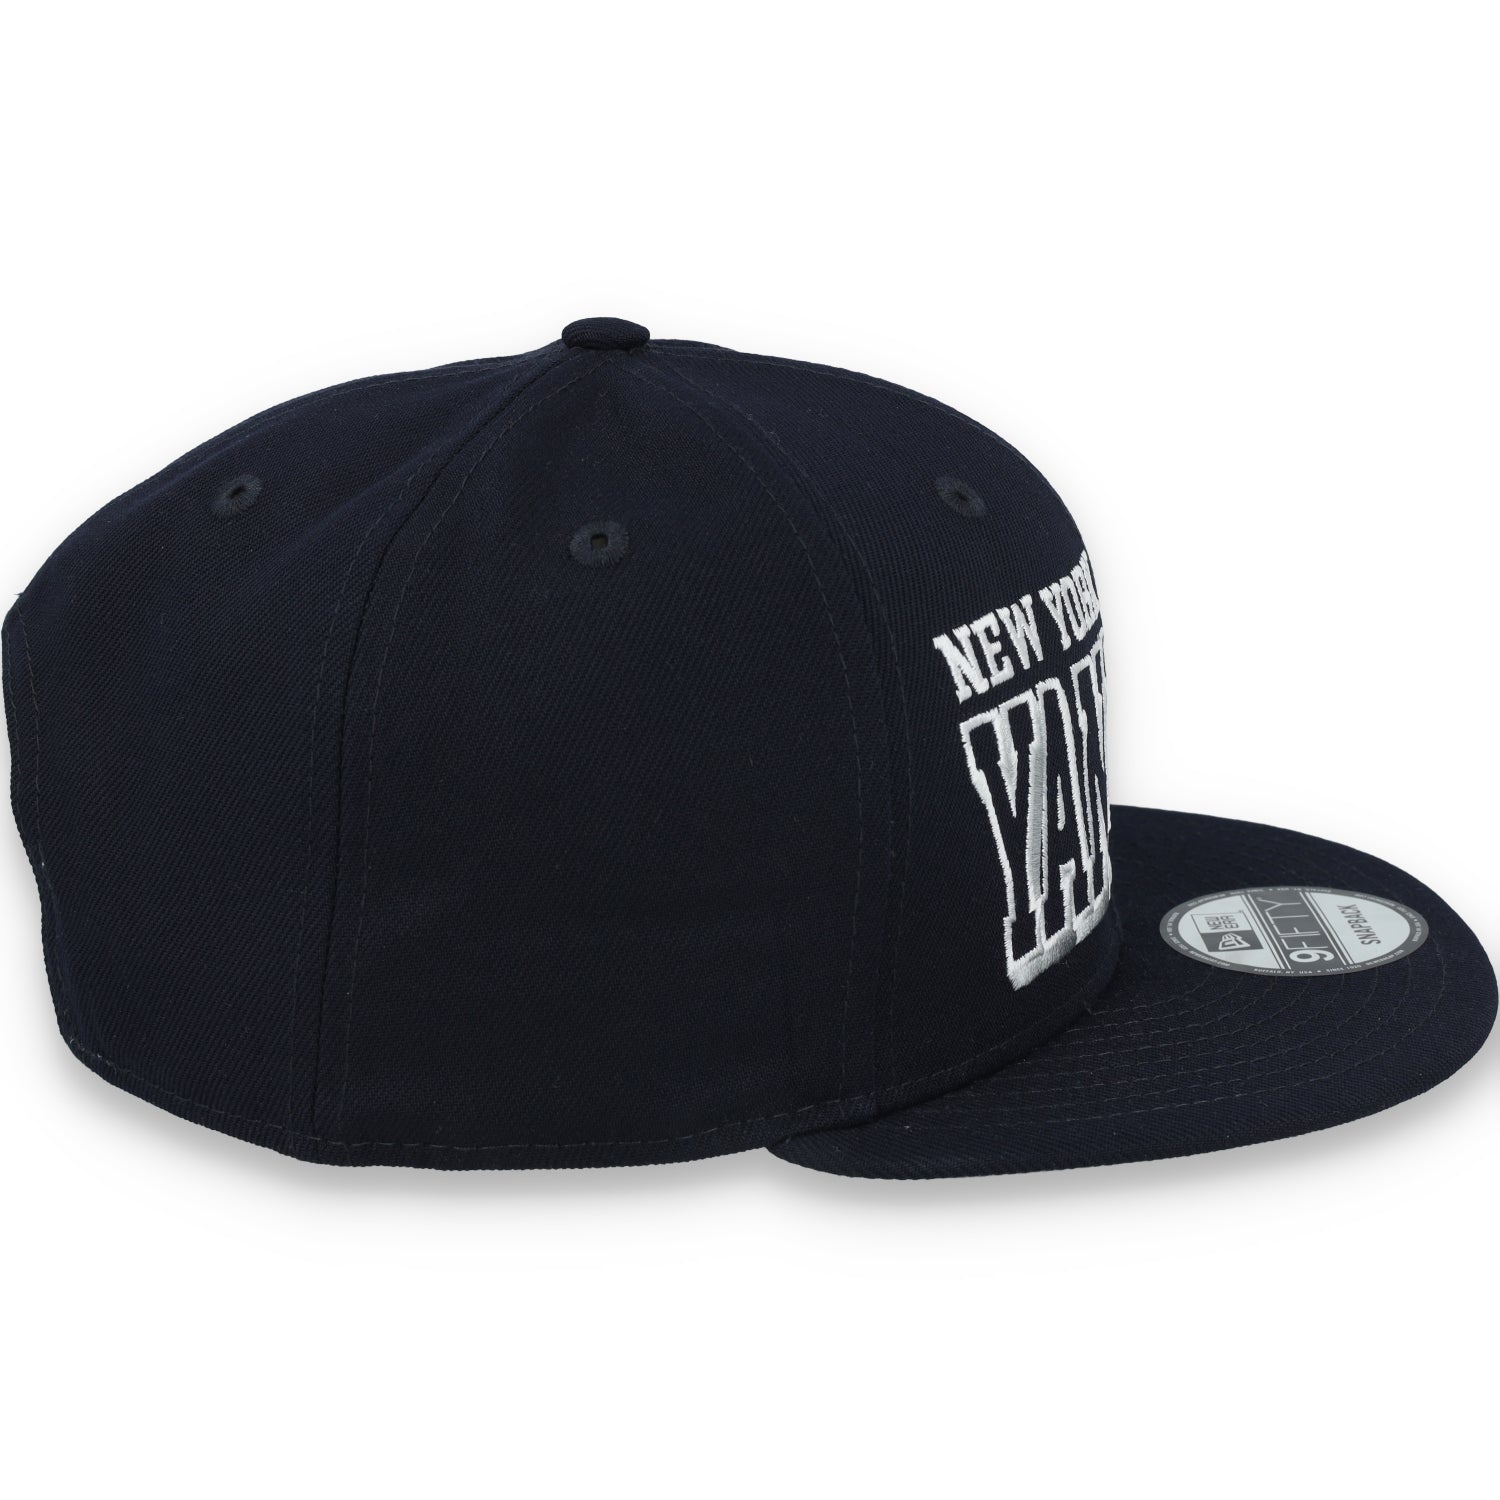 New Era New York Yankees Game Day 9FIFTY Snapback Hat